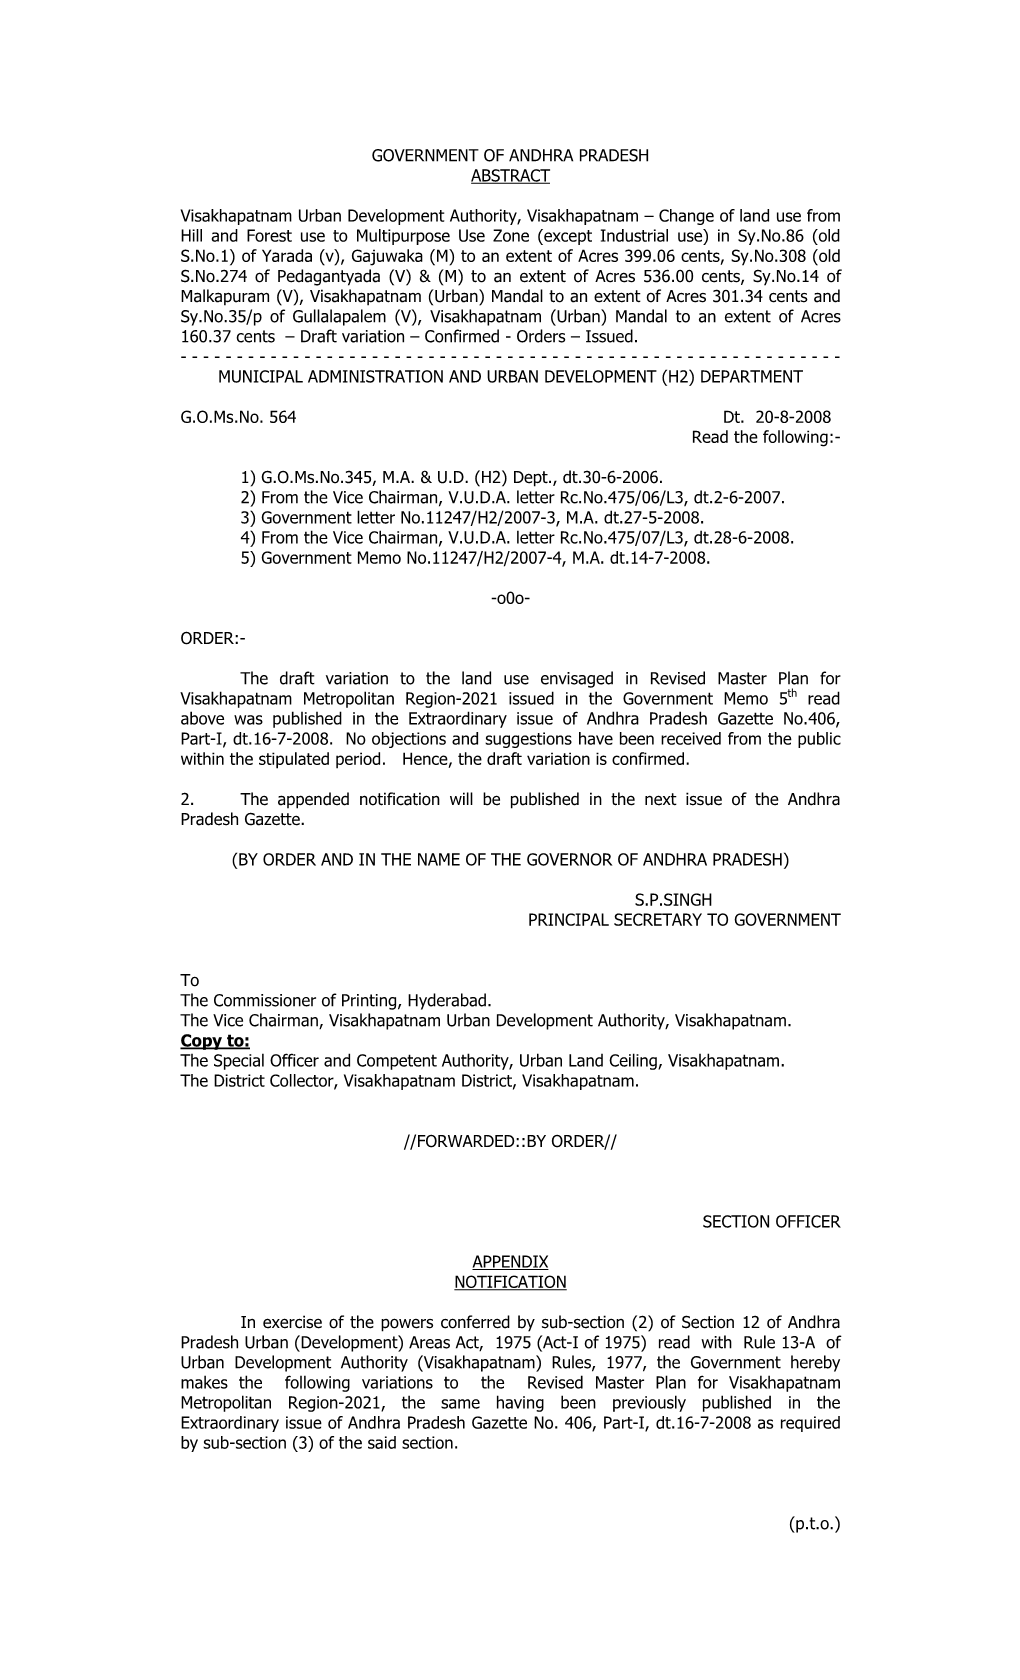 GOVERNMENT of ANDHRA PRADESH ABSTRACT Visakhapatnam Urban Development Authority, Visakhapatnam – Change of Land Use from Hill